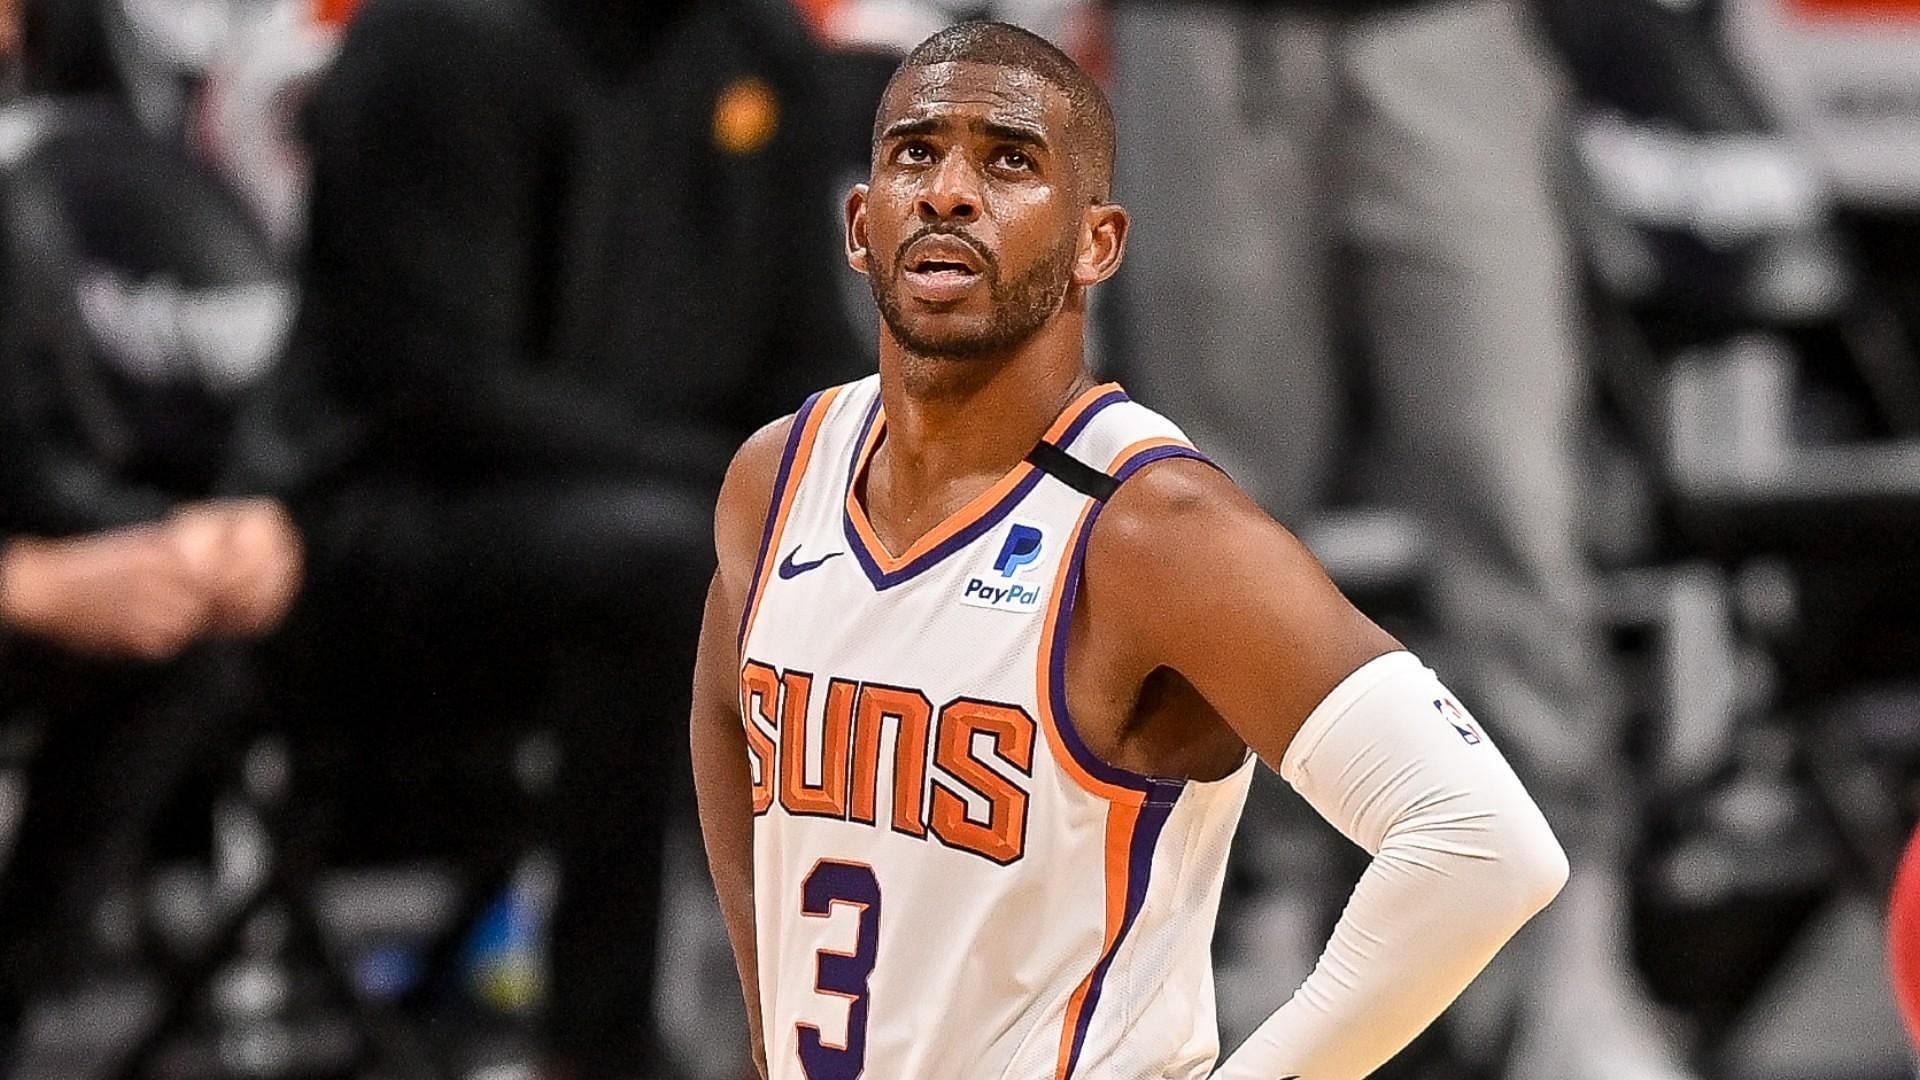 How long can Chris Paul continue his level of stellar play?